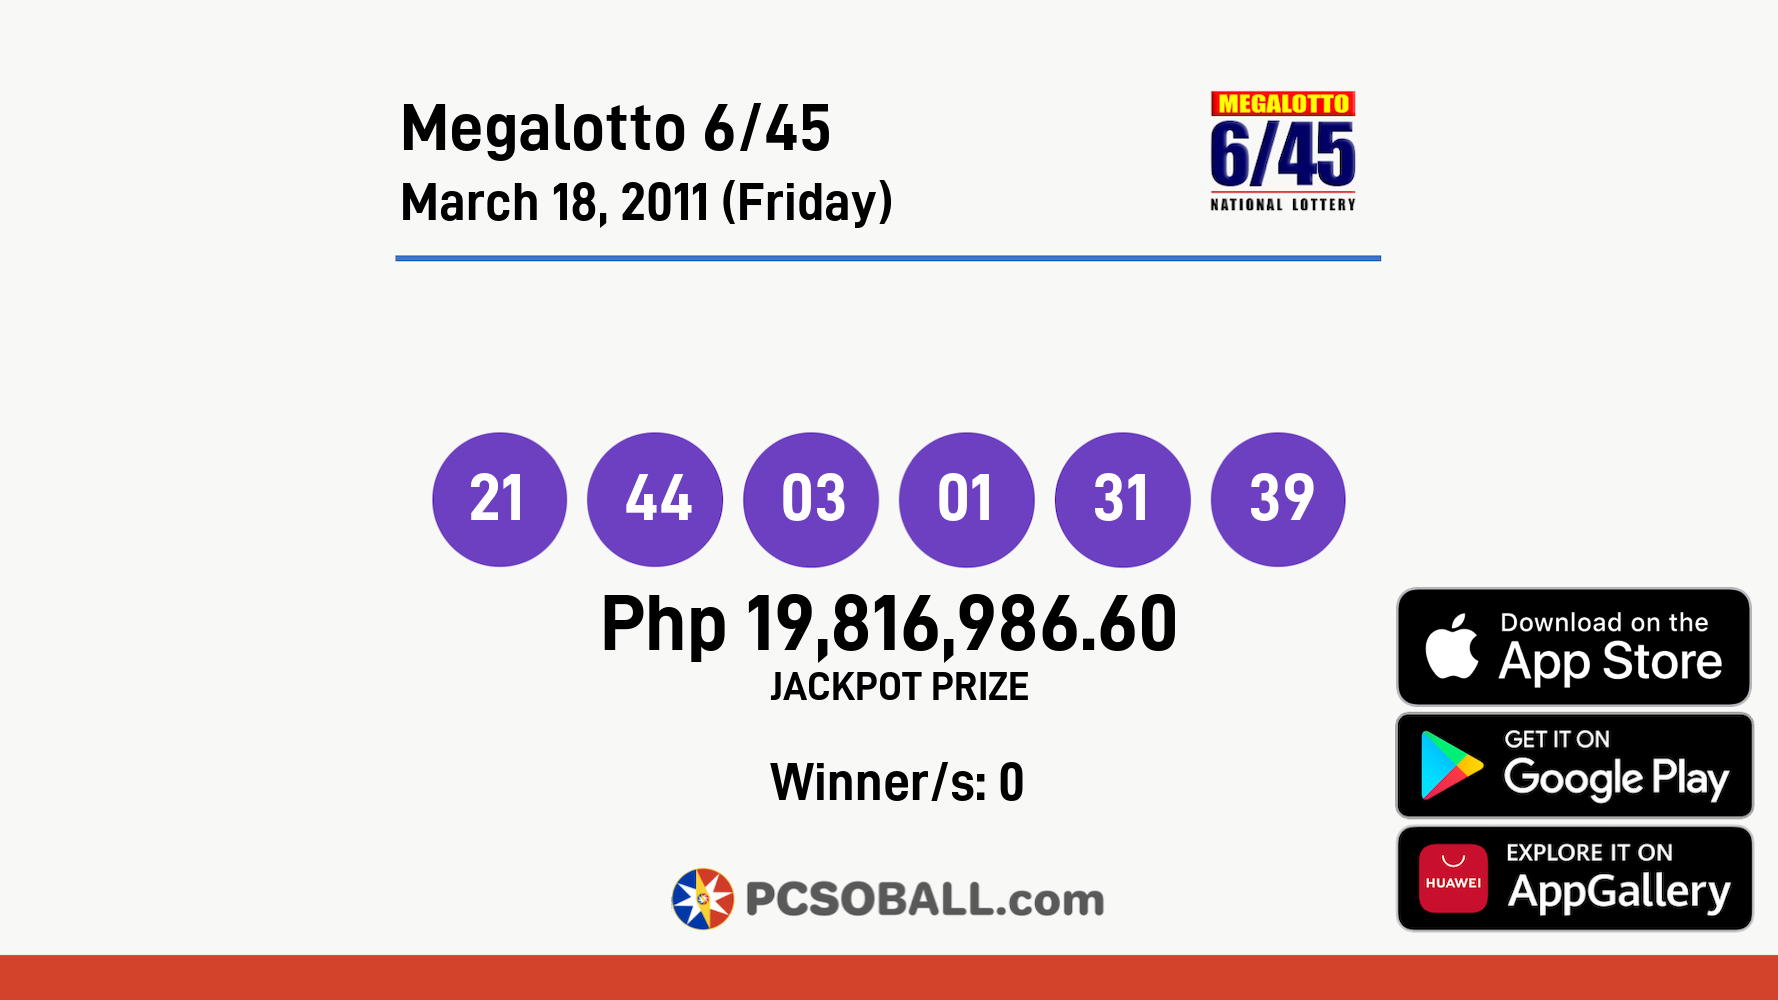 Megalotto 6/45 March 18, 2011 (Friday) Result